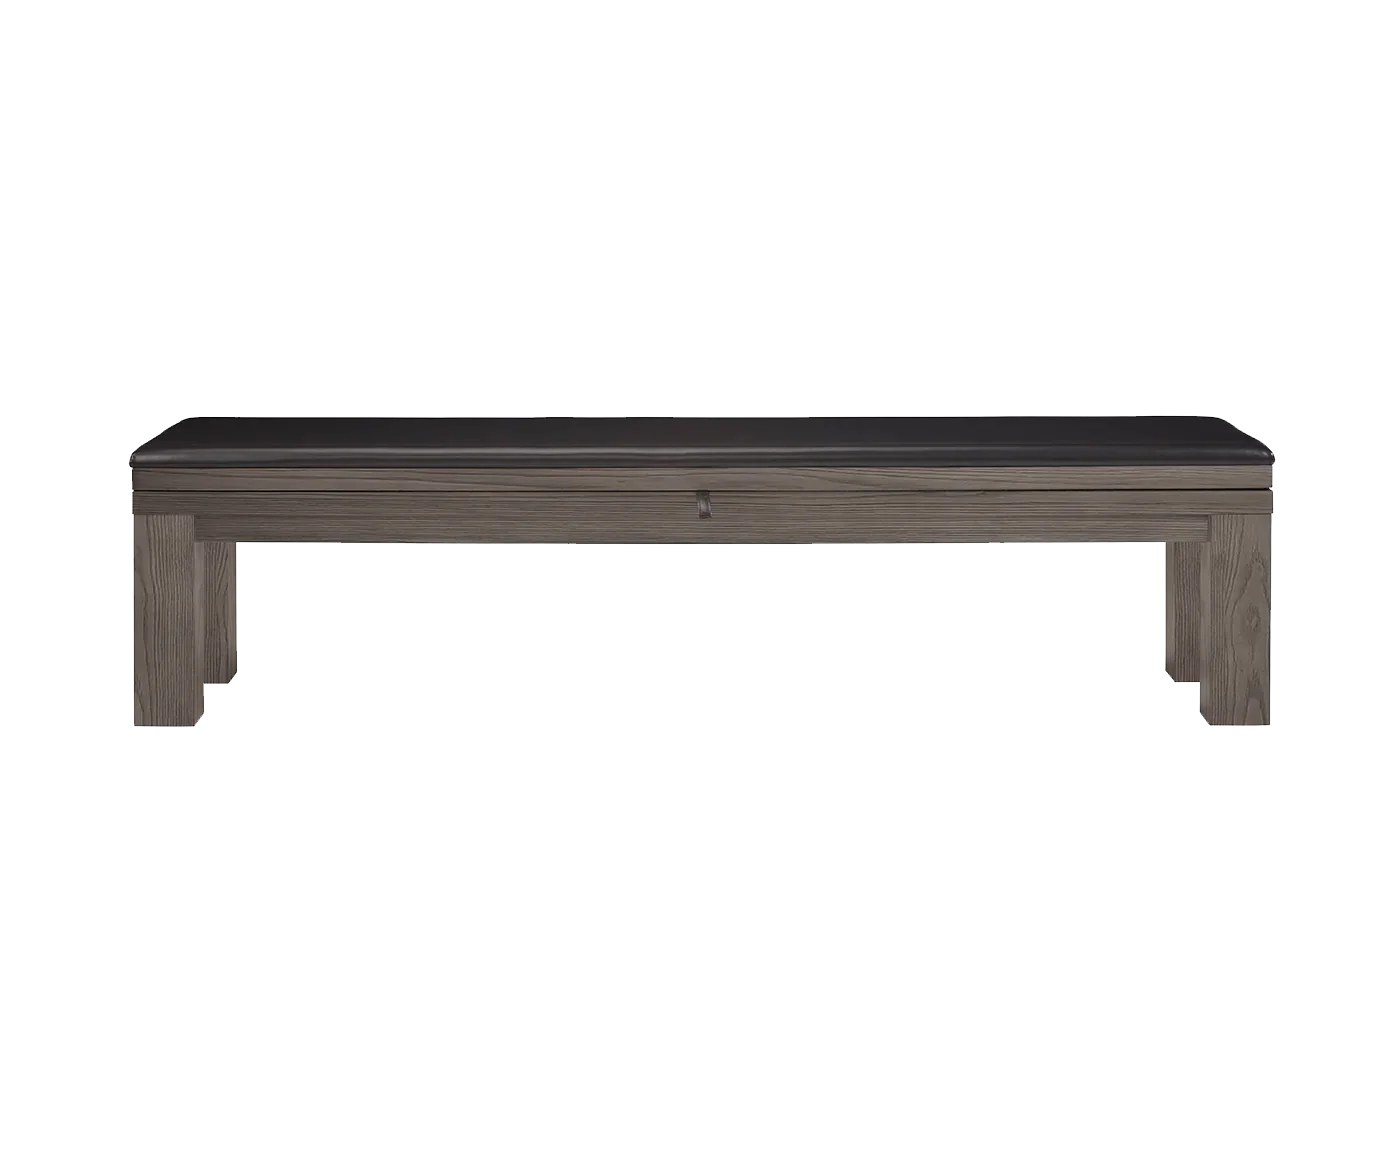 American Heritage Alta Multi-Functional Storage Bench in Charcoal